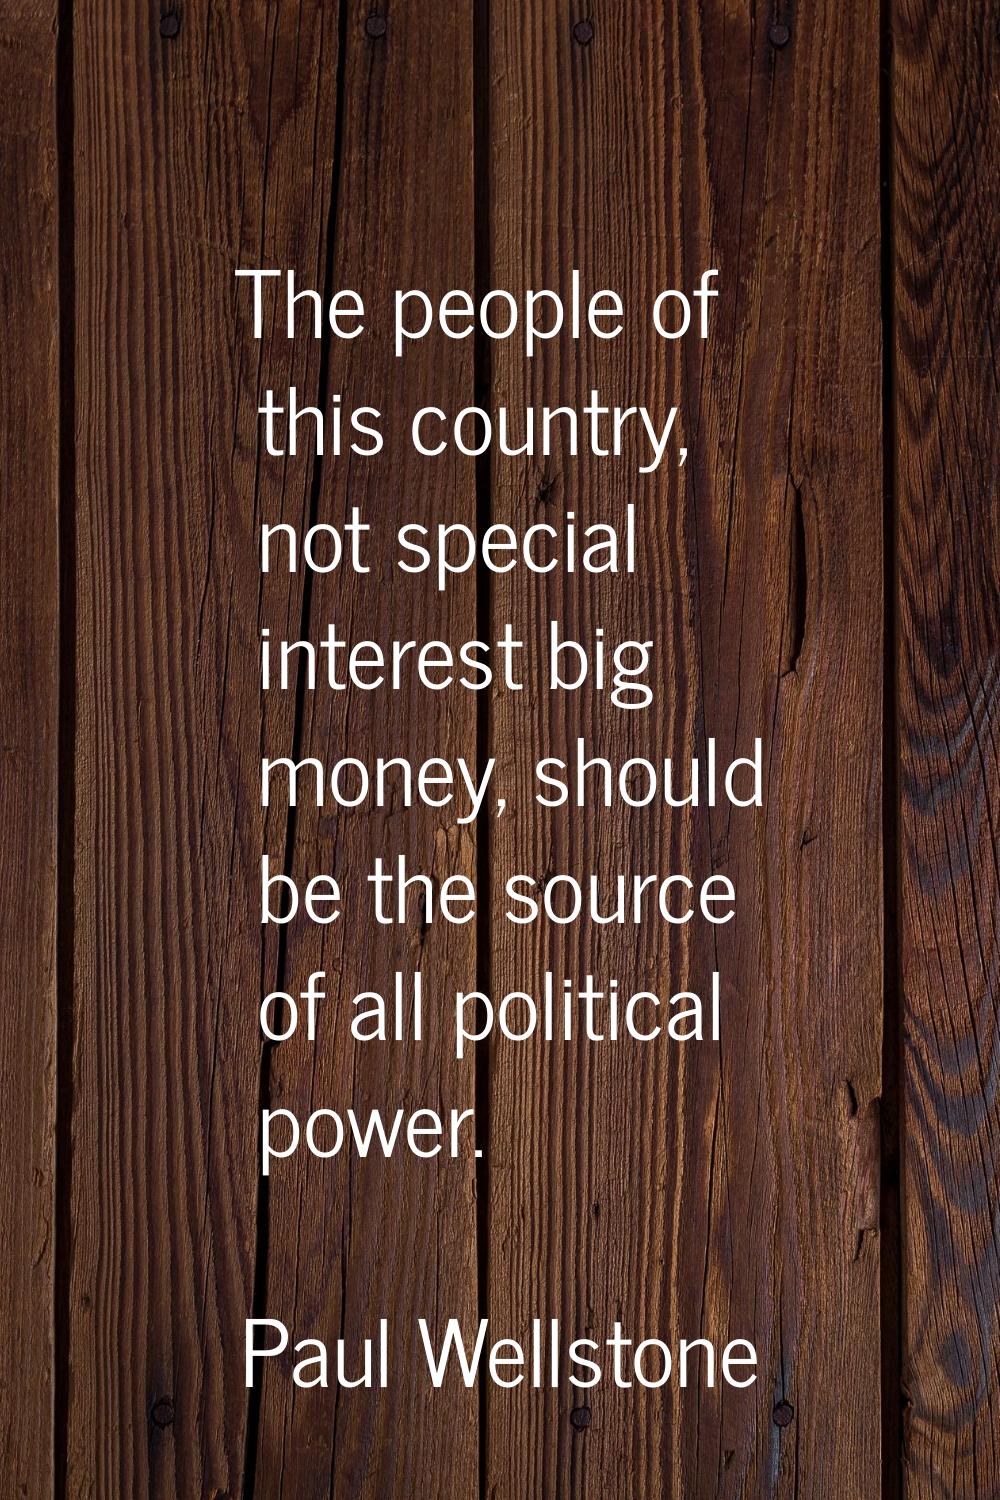 The people of this country, not special interest big money, should be the source of all political p